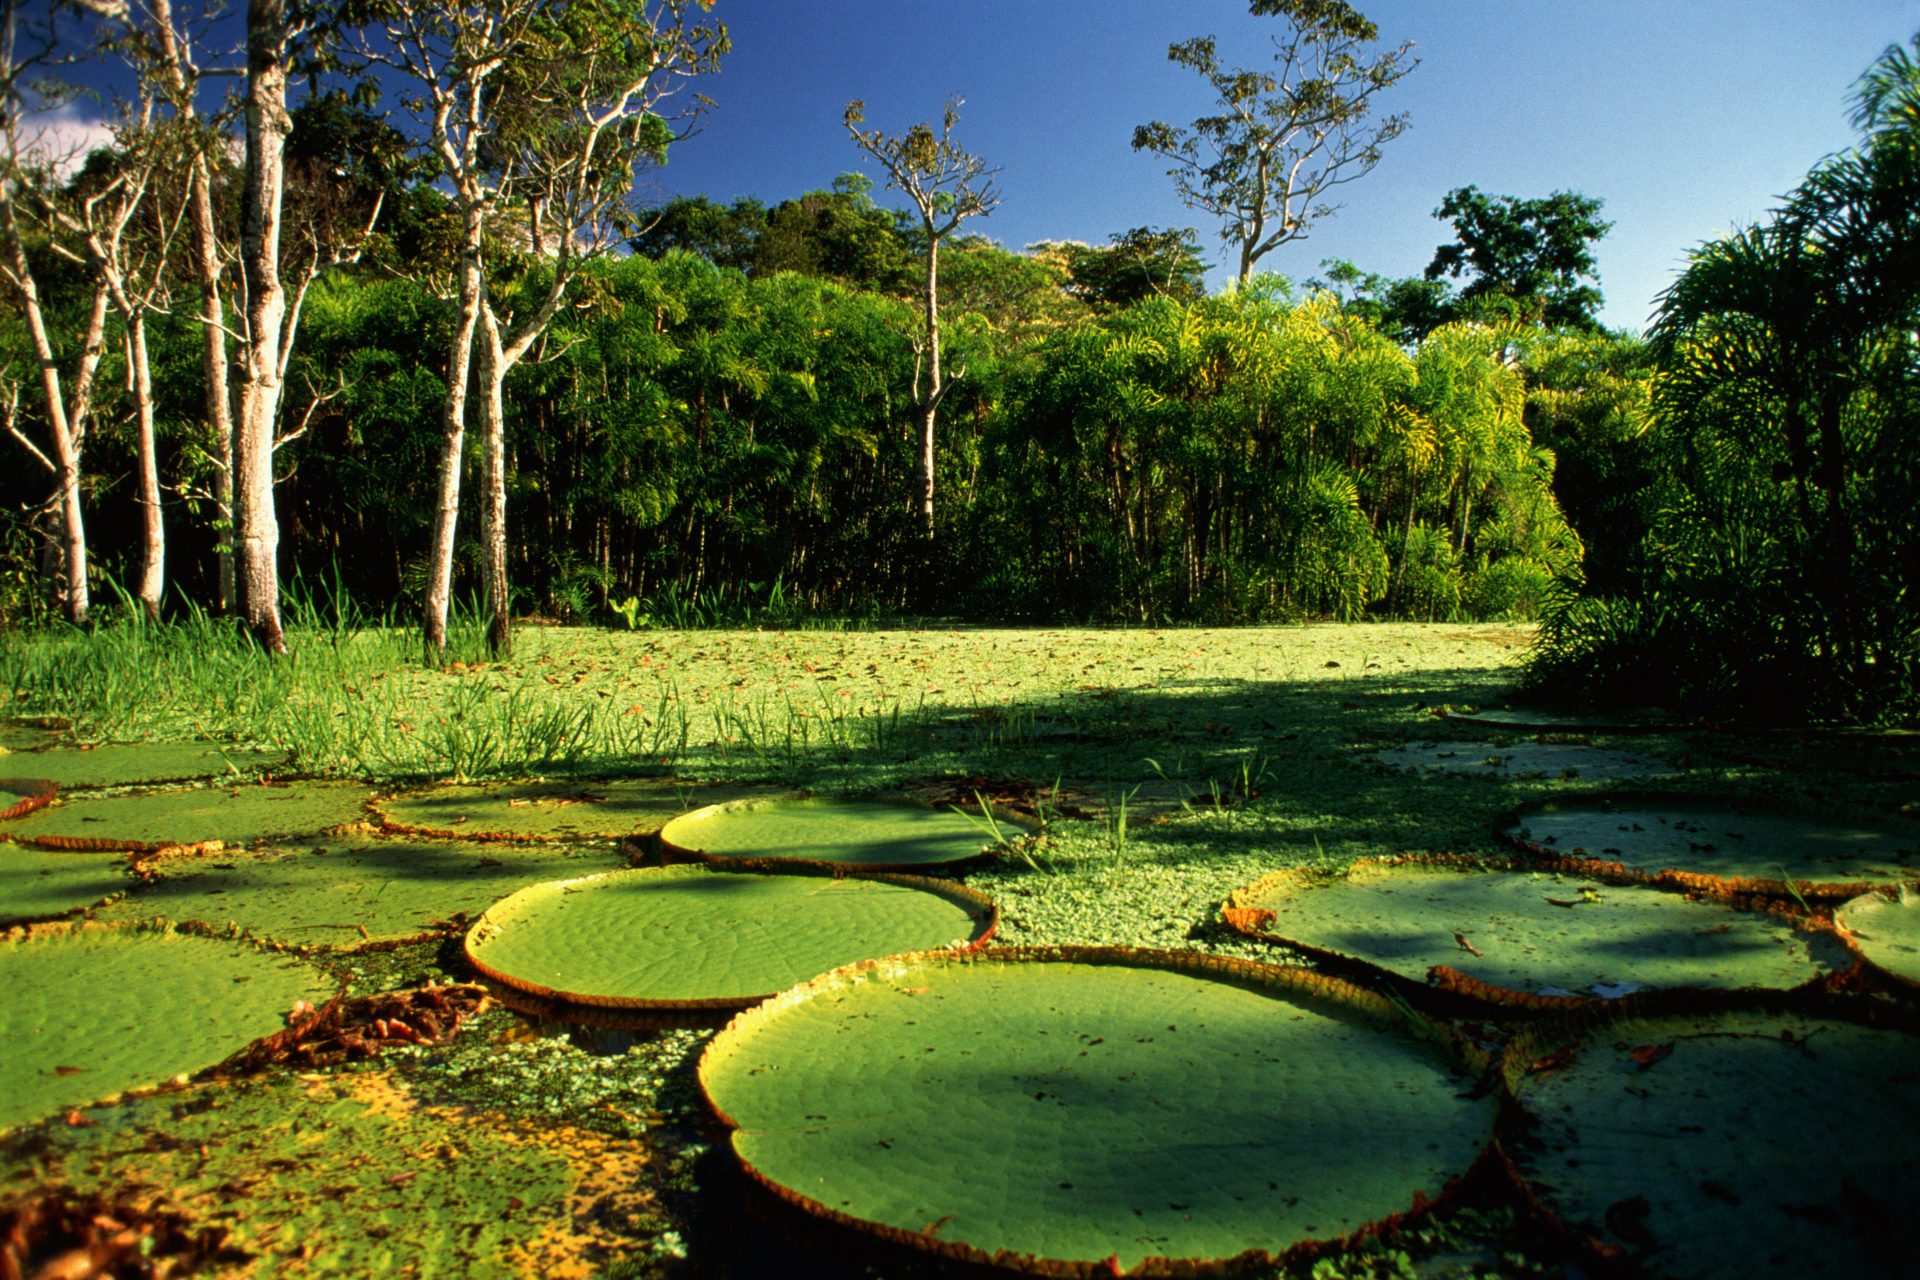 South America's most beautiful UNESCO World Heritage natural sites